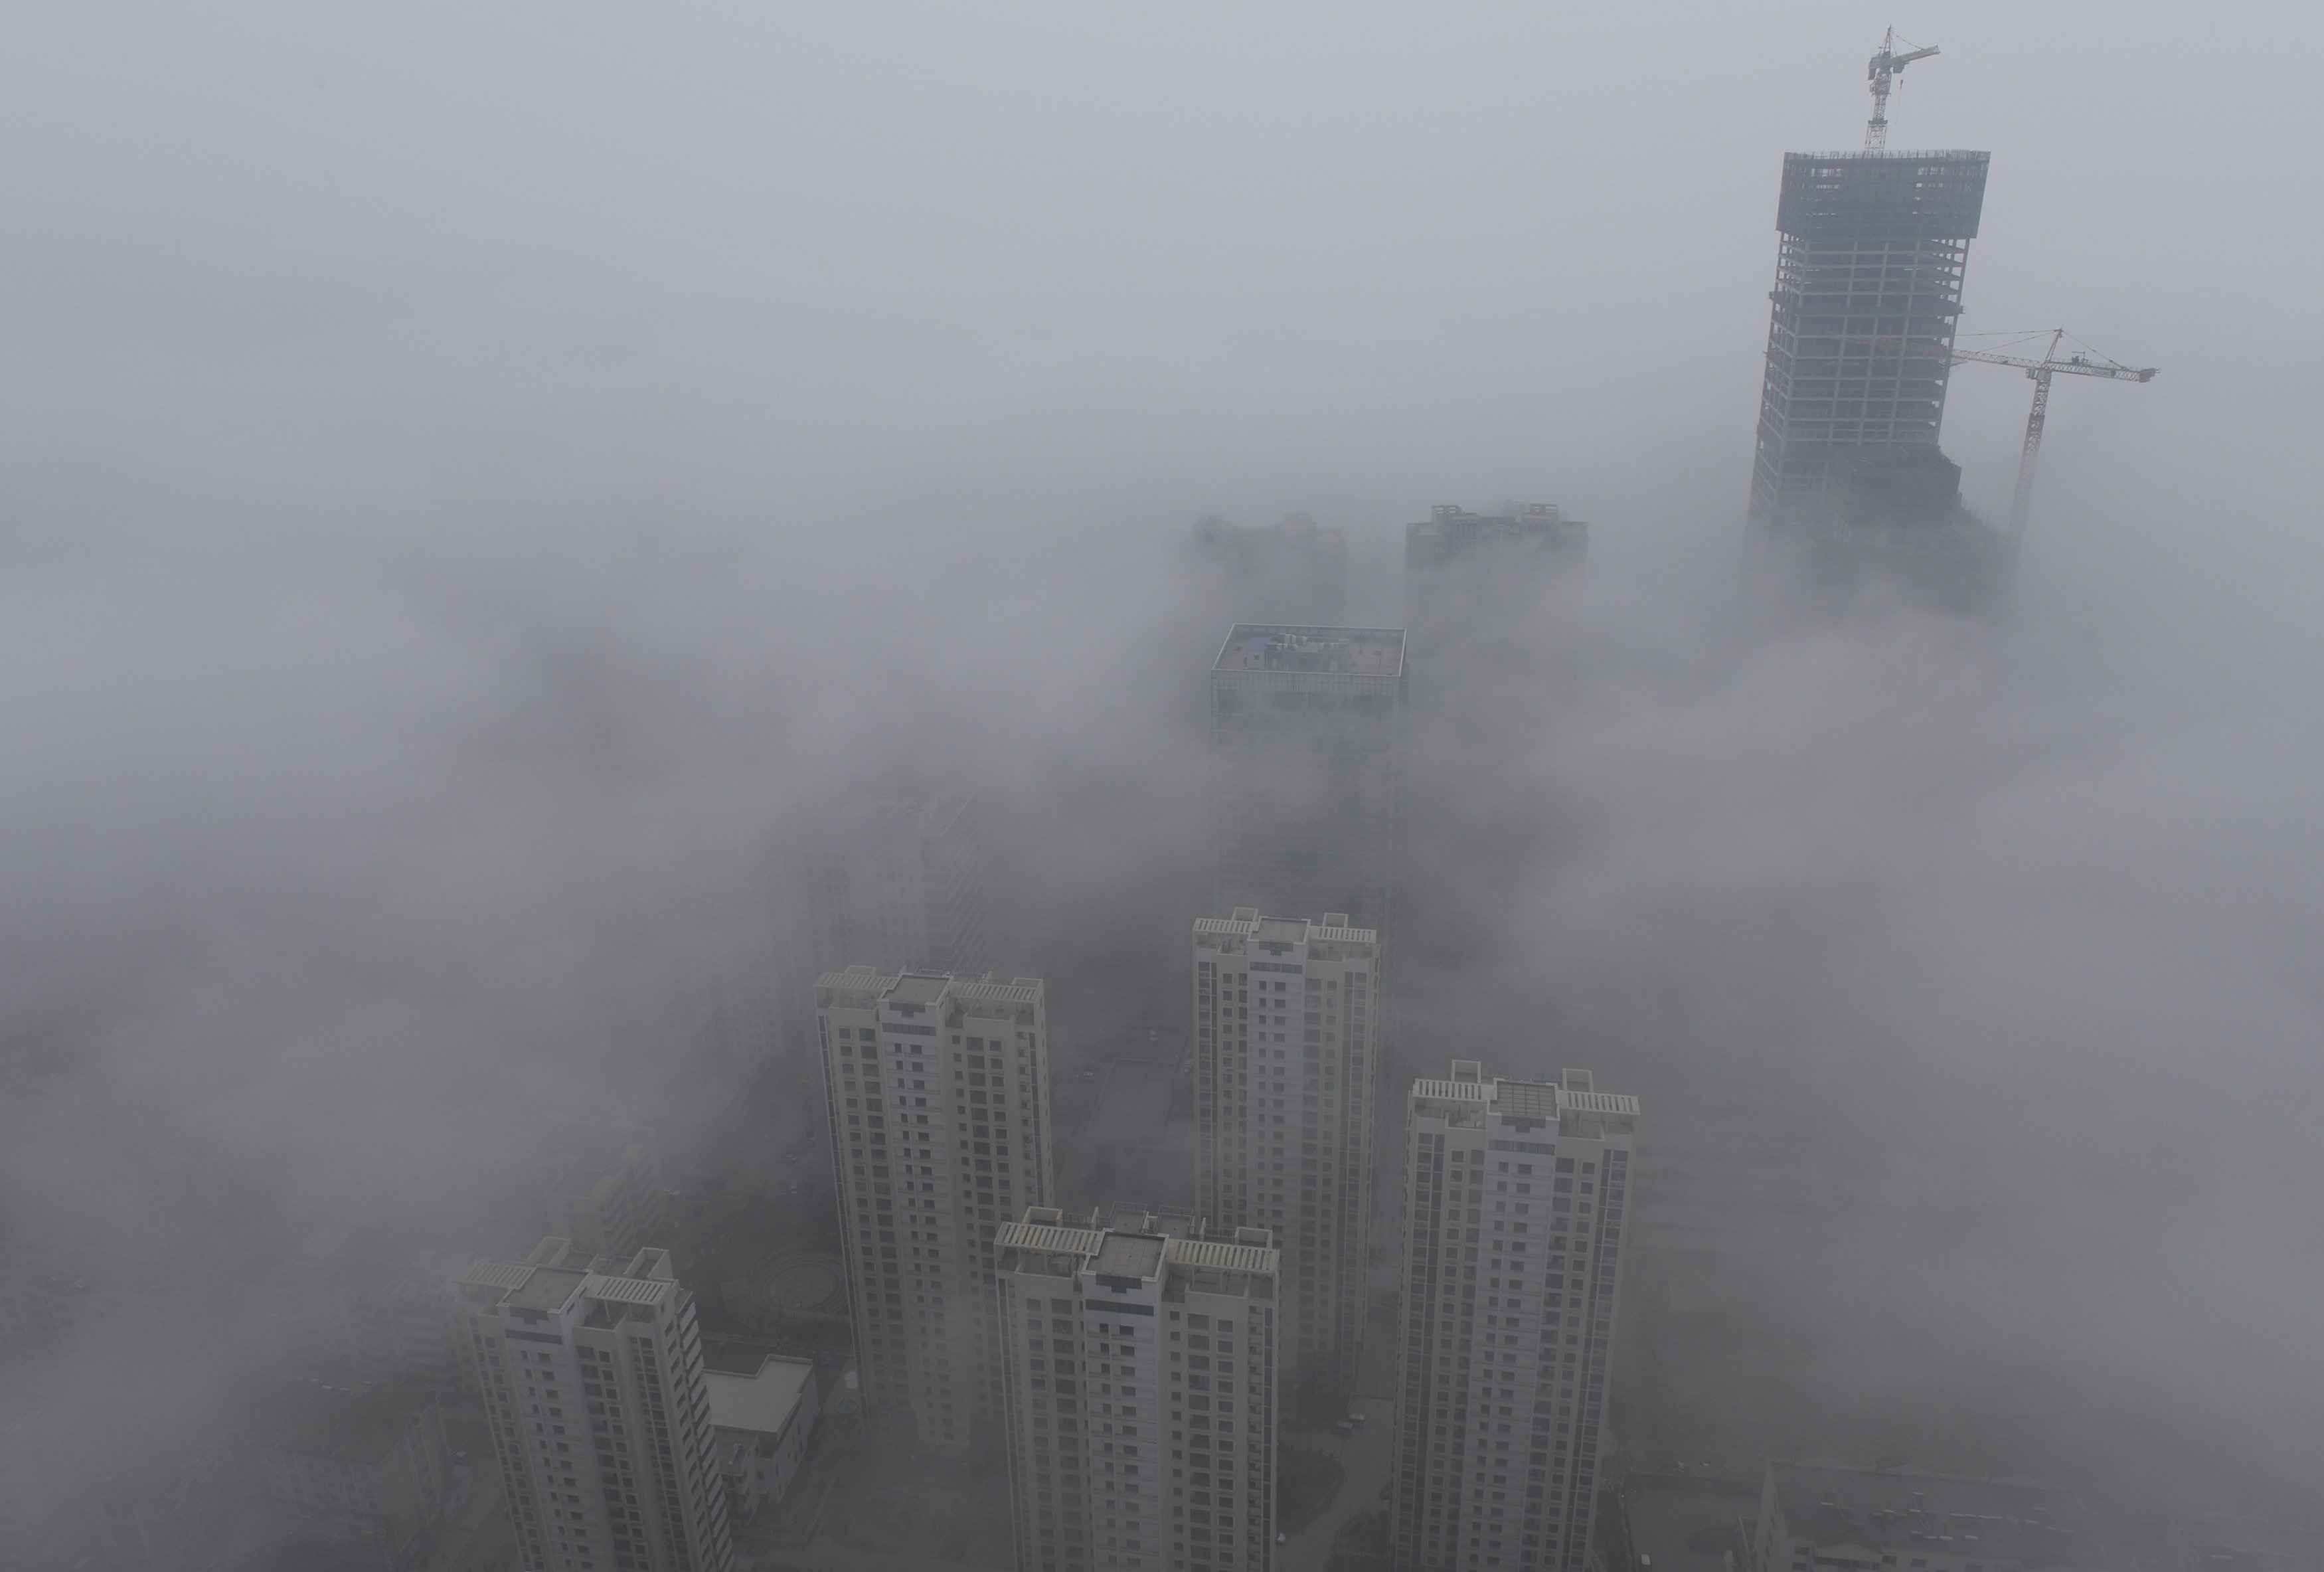 Buildings are seen shrouded in heavy haze at Qingdao development zone, Shandong province, February 25, 2014. (Reuters&mdash;Reuters)